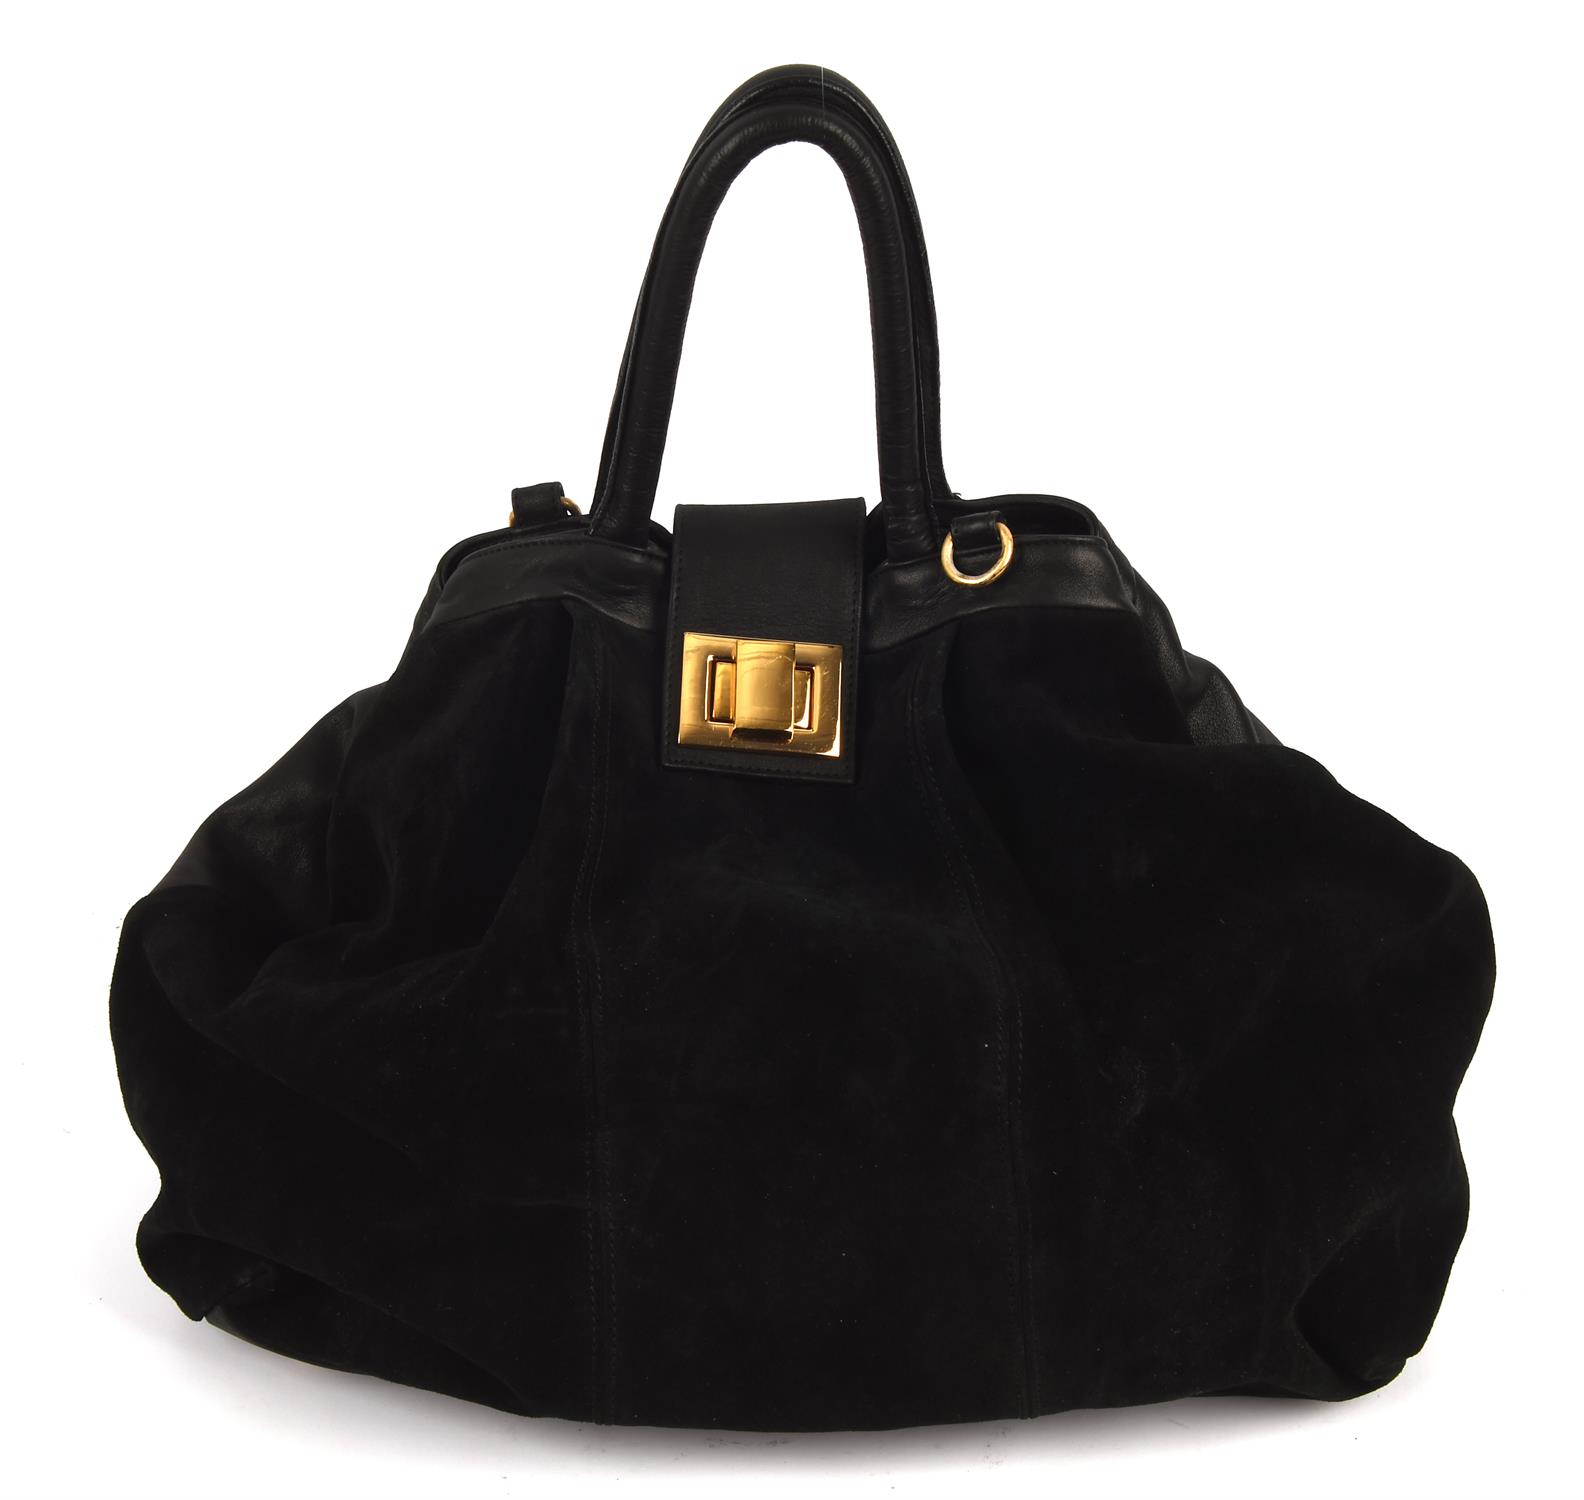 RUSSELL & BROMLEY 1990s a large vintage black leather and suede tote handbag with gold hardware and - Image 2 of 6